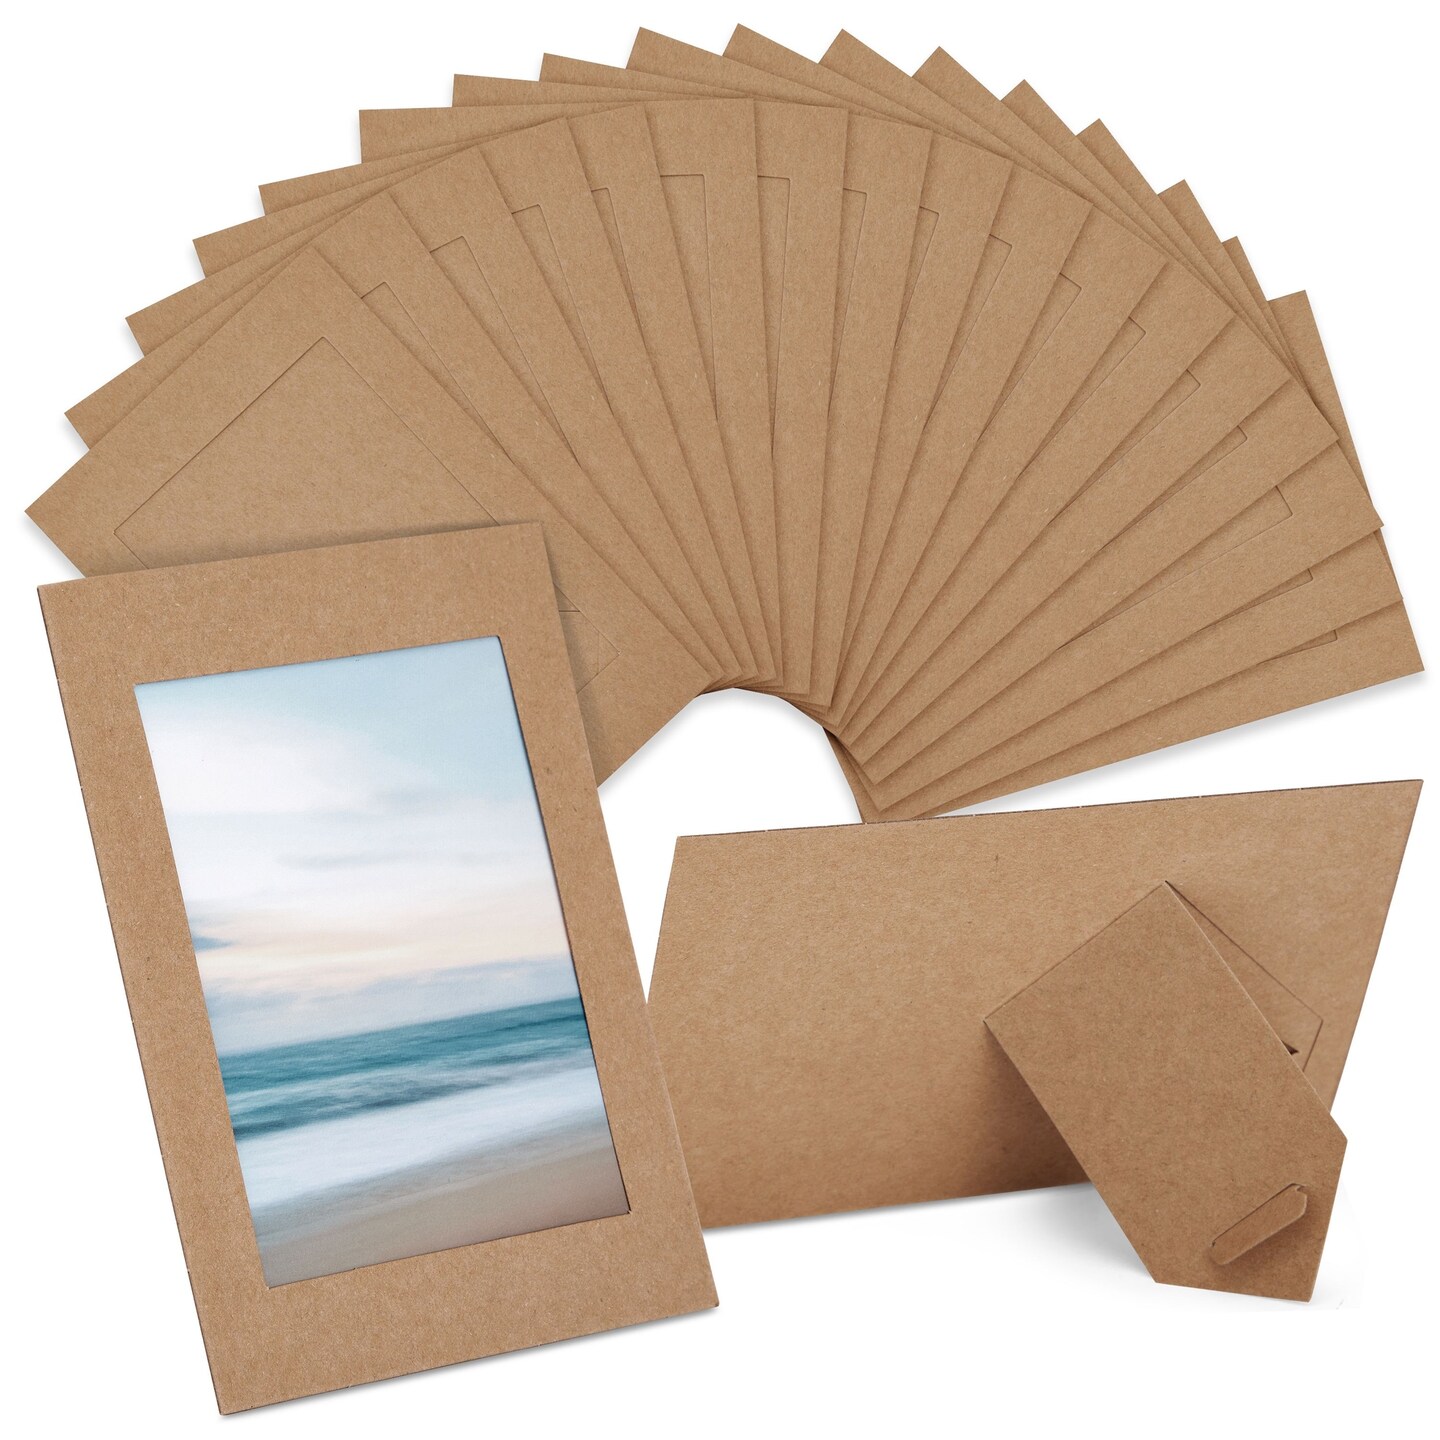 50 Pack Cardboard Photo Picture Frames Easel, White, 4x6 in